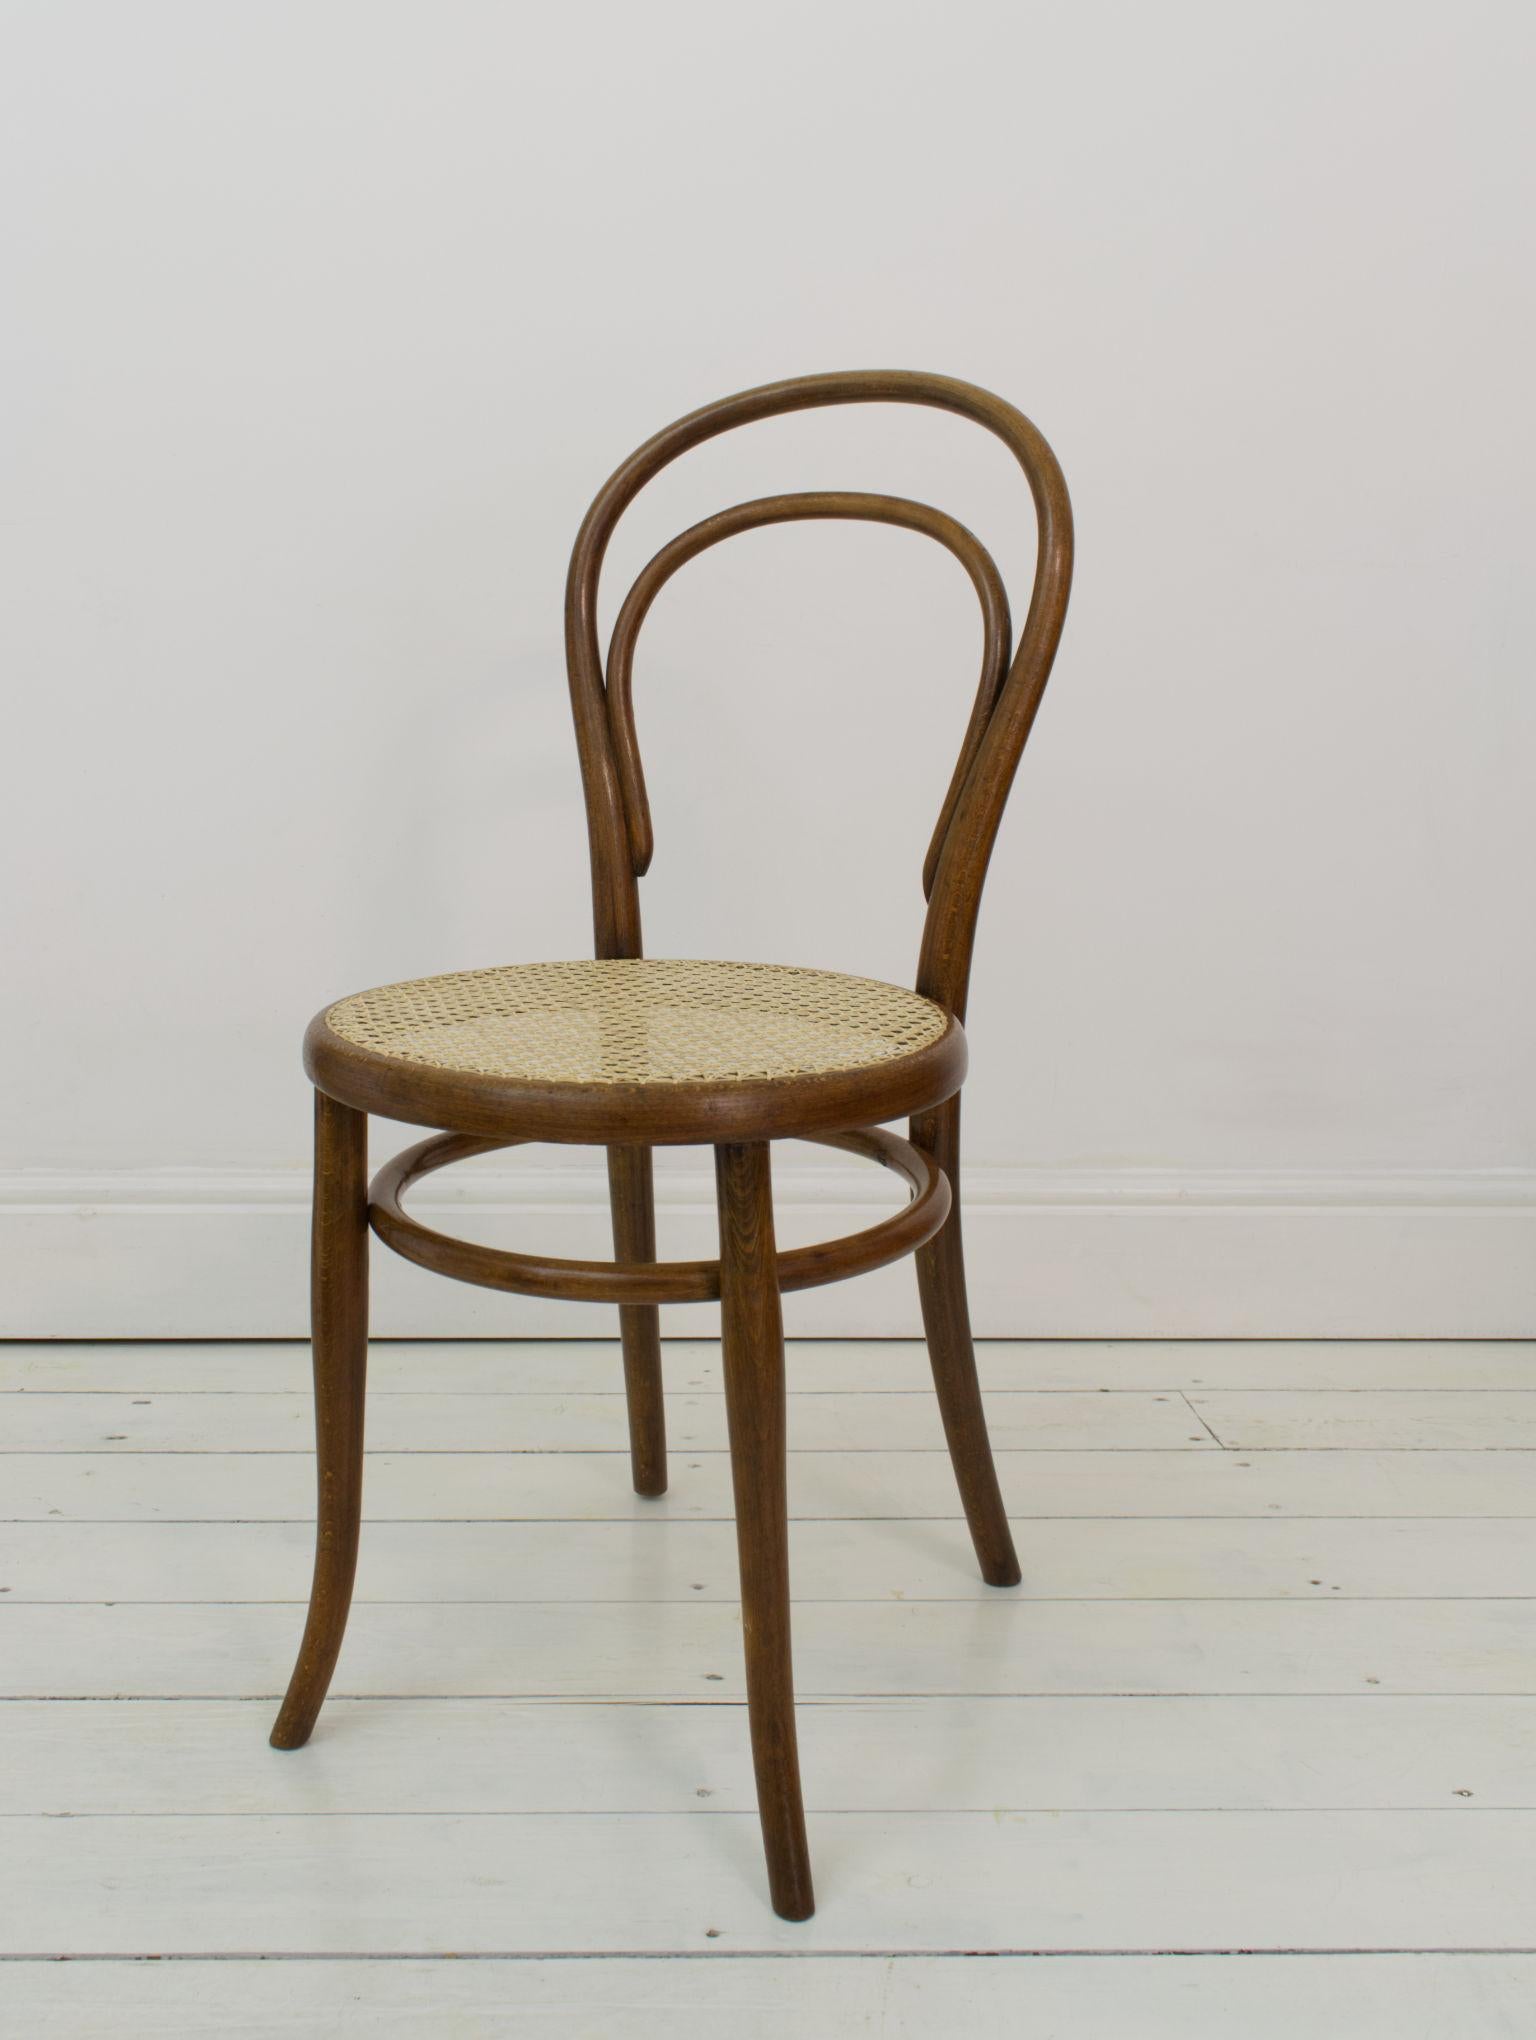 An early example of Thonet’s most famous chair, with original label dating it between 1890-1910, these chairs are also mysteriously branded P.V.C. along the back of the seat, though we have not been able to decipher the originals of this bit of